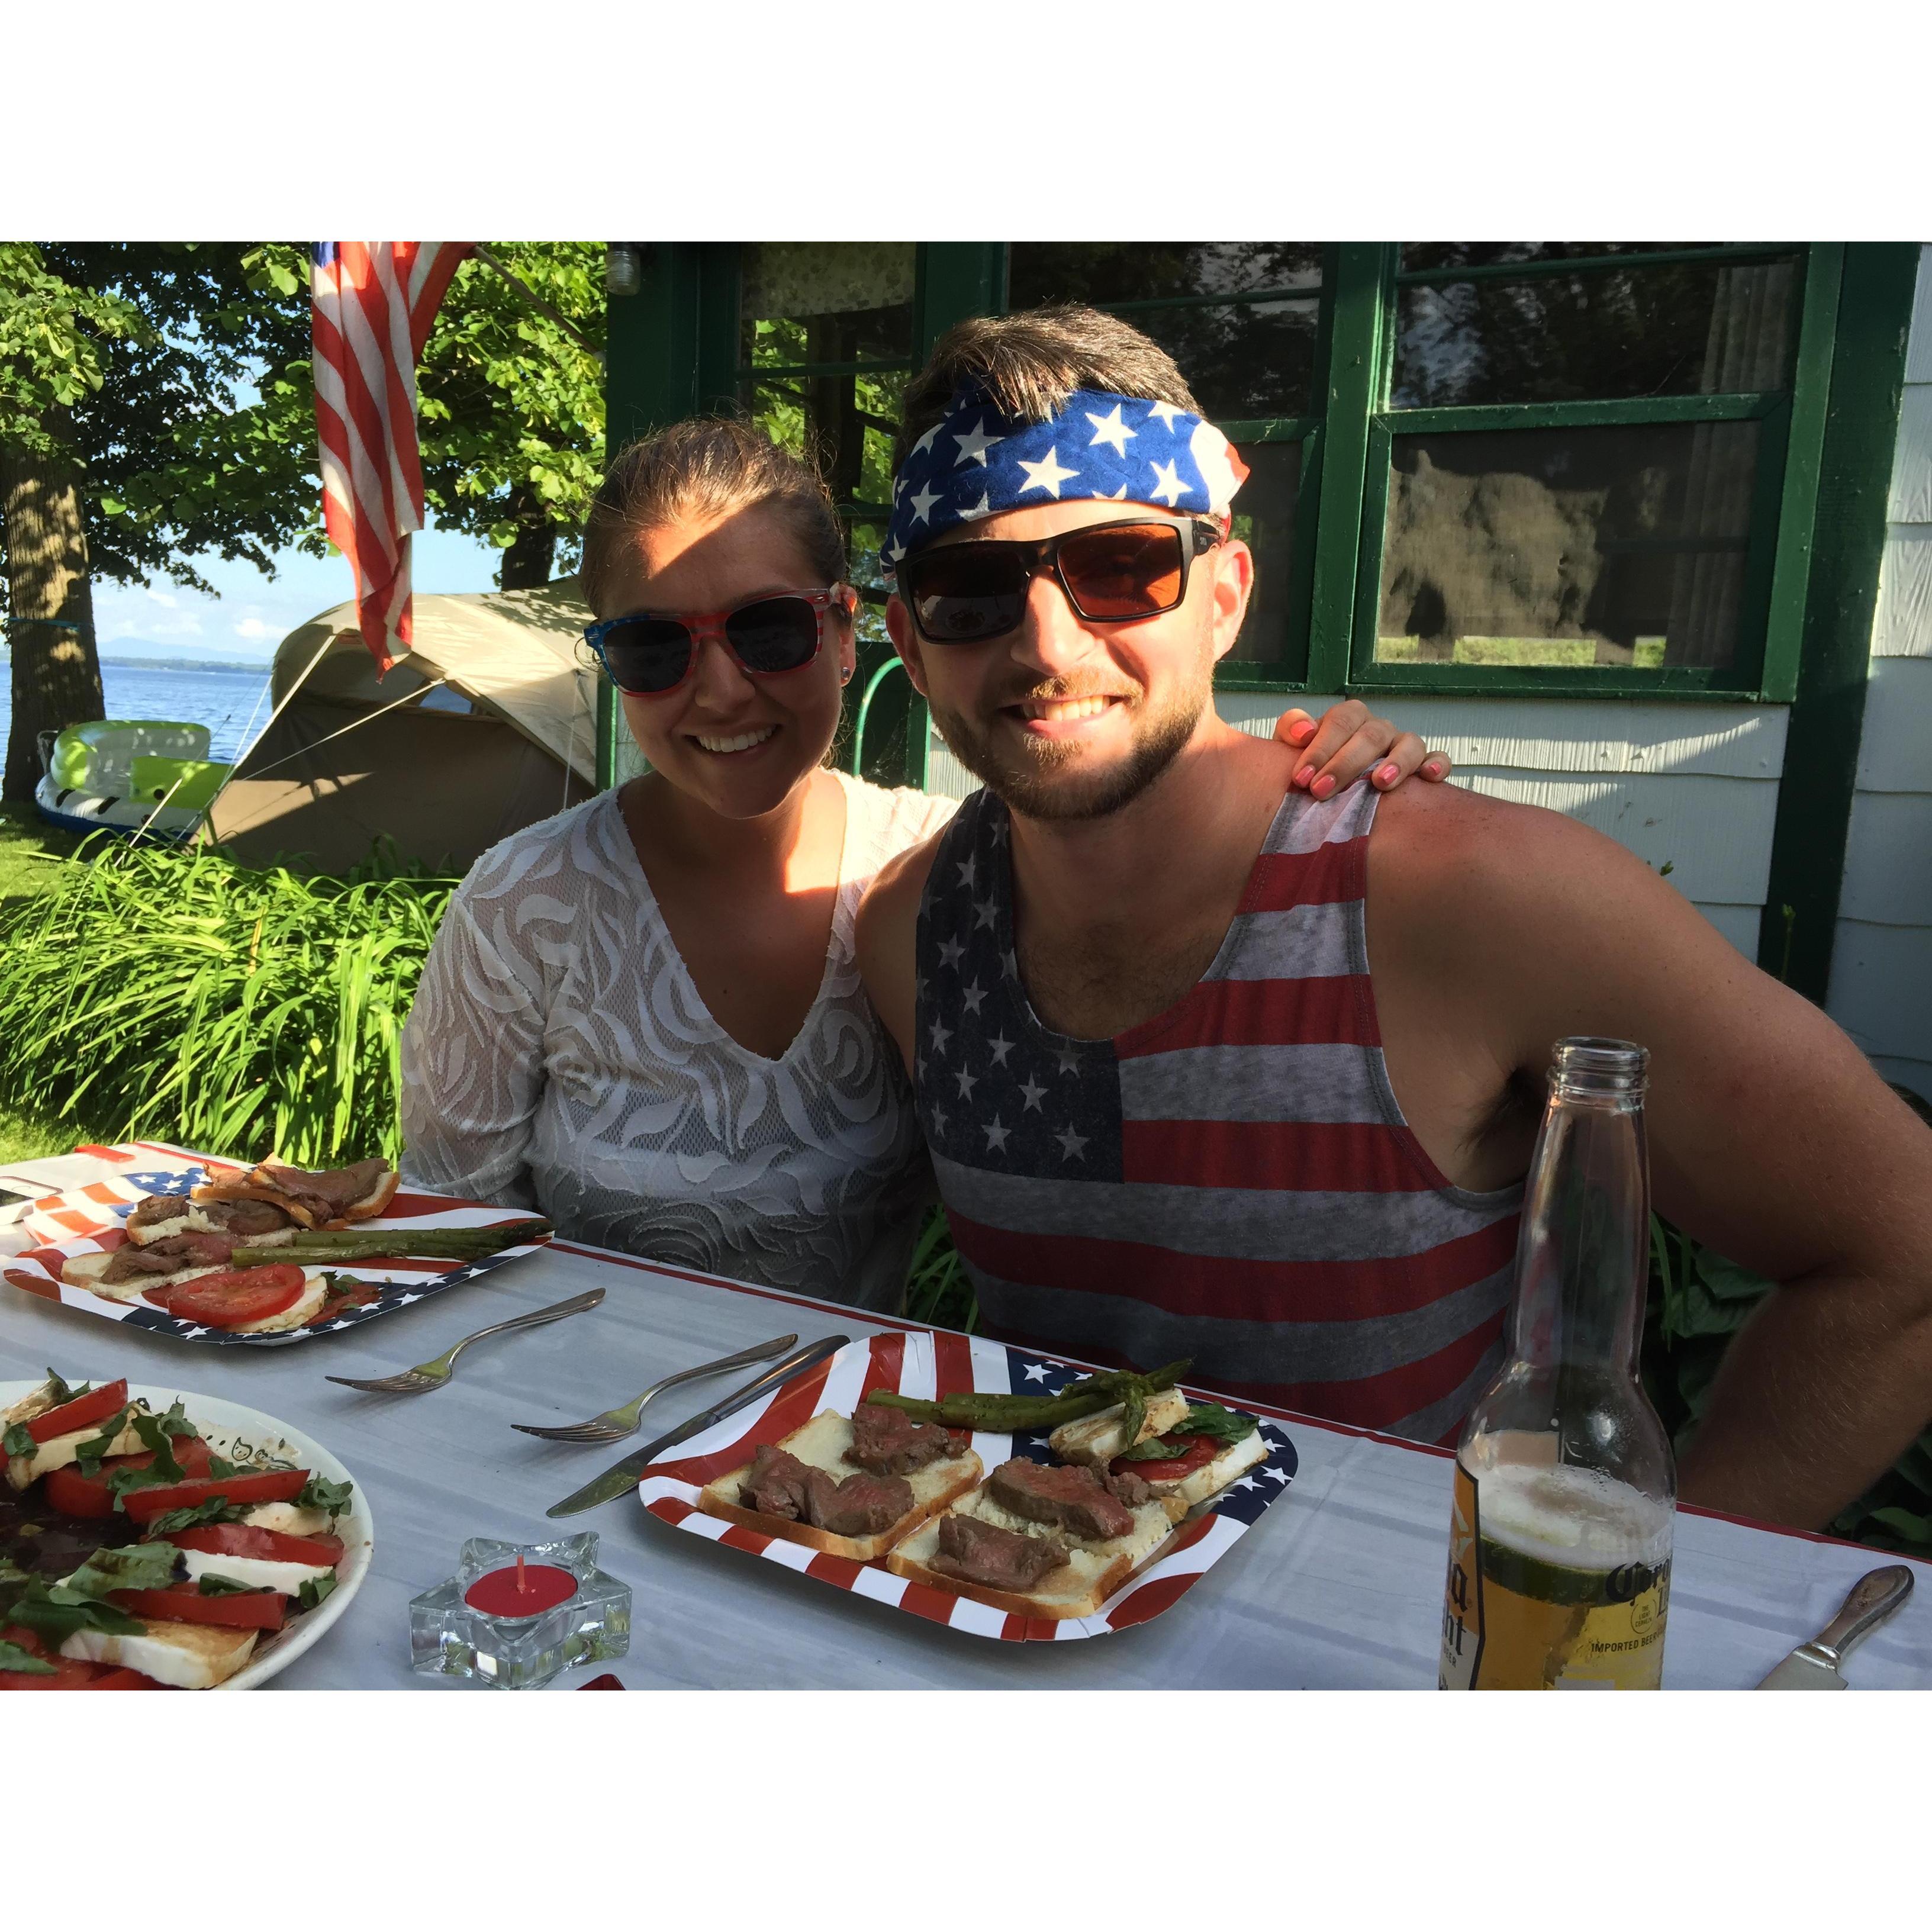 We love 4th of July's at camp! Little did we know only a few years later we'd be getting married right here!